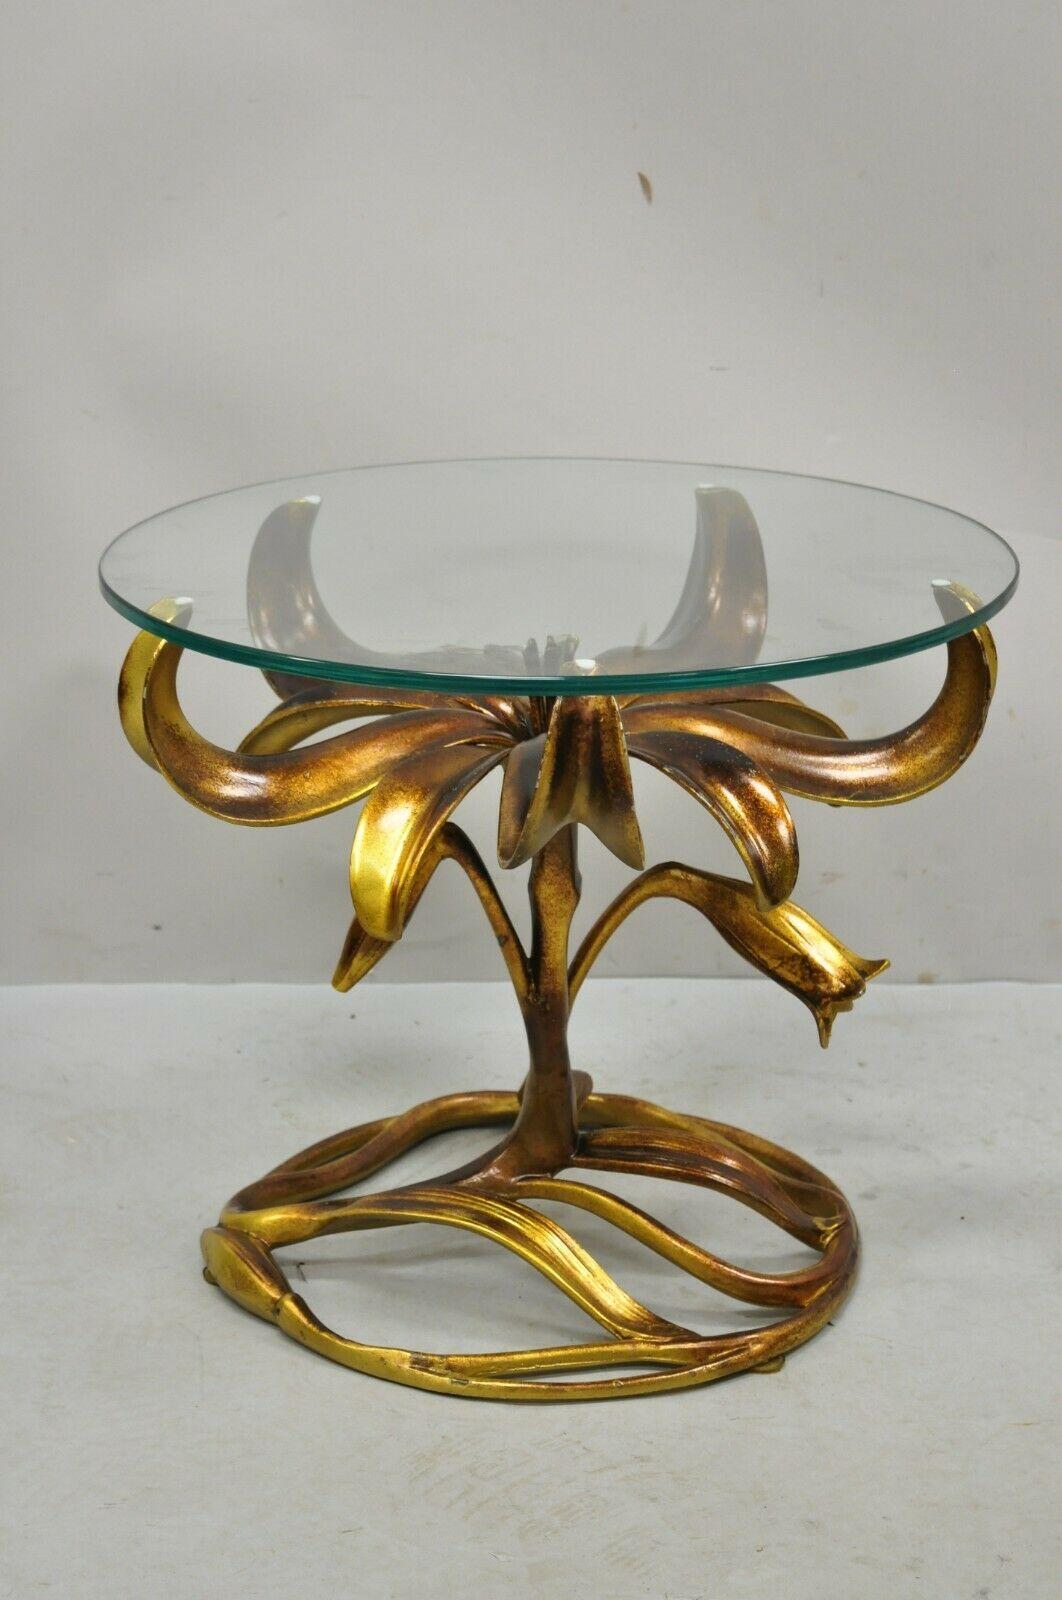 Arthur court gold gilt round glass top lily flowers side table. Item features cast aluminum gold gilt lily flower base, round glass top, burnished gold finish. Circa mid-20th century. Measurements: 16.5